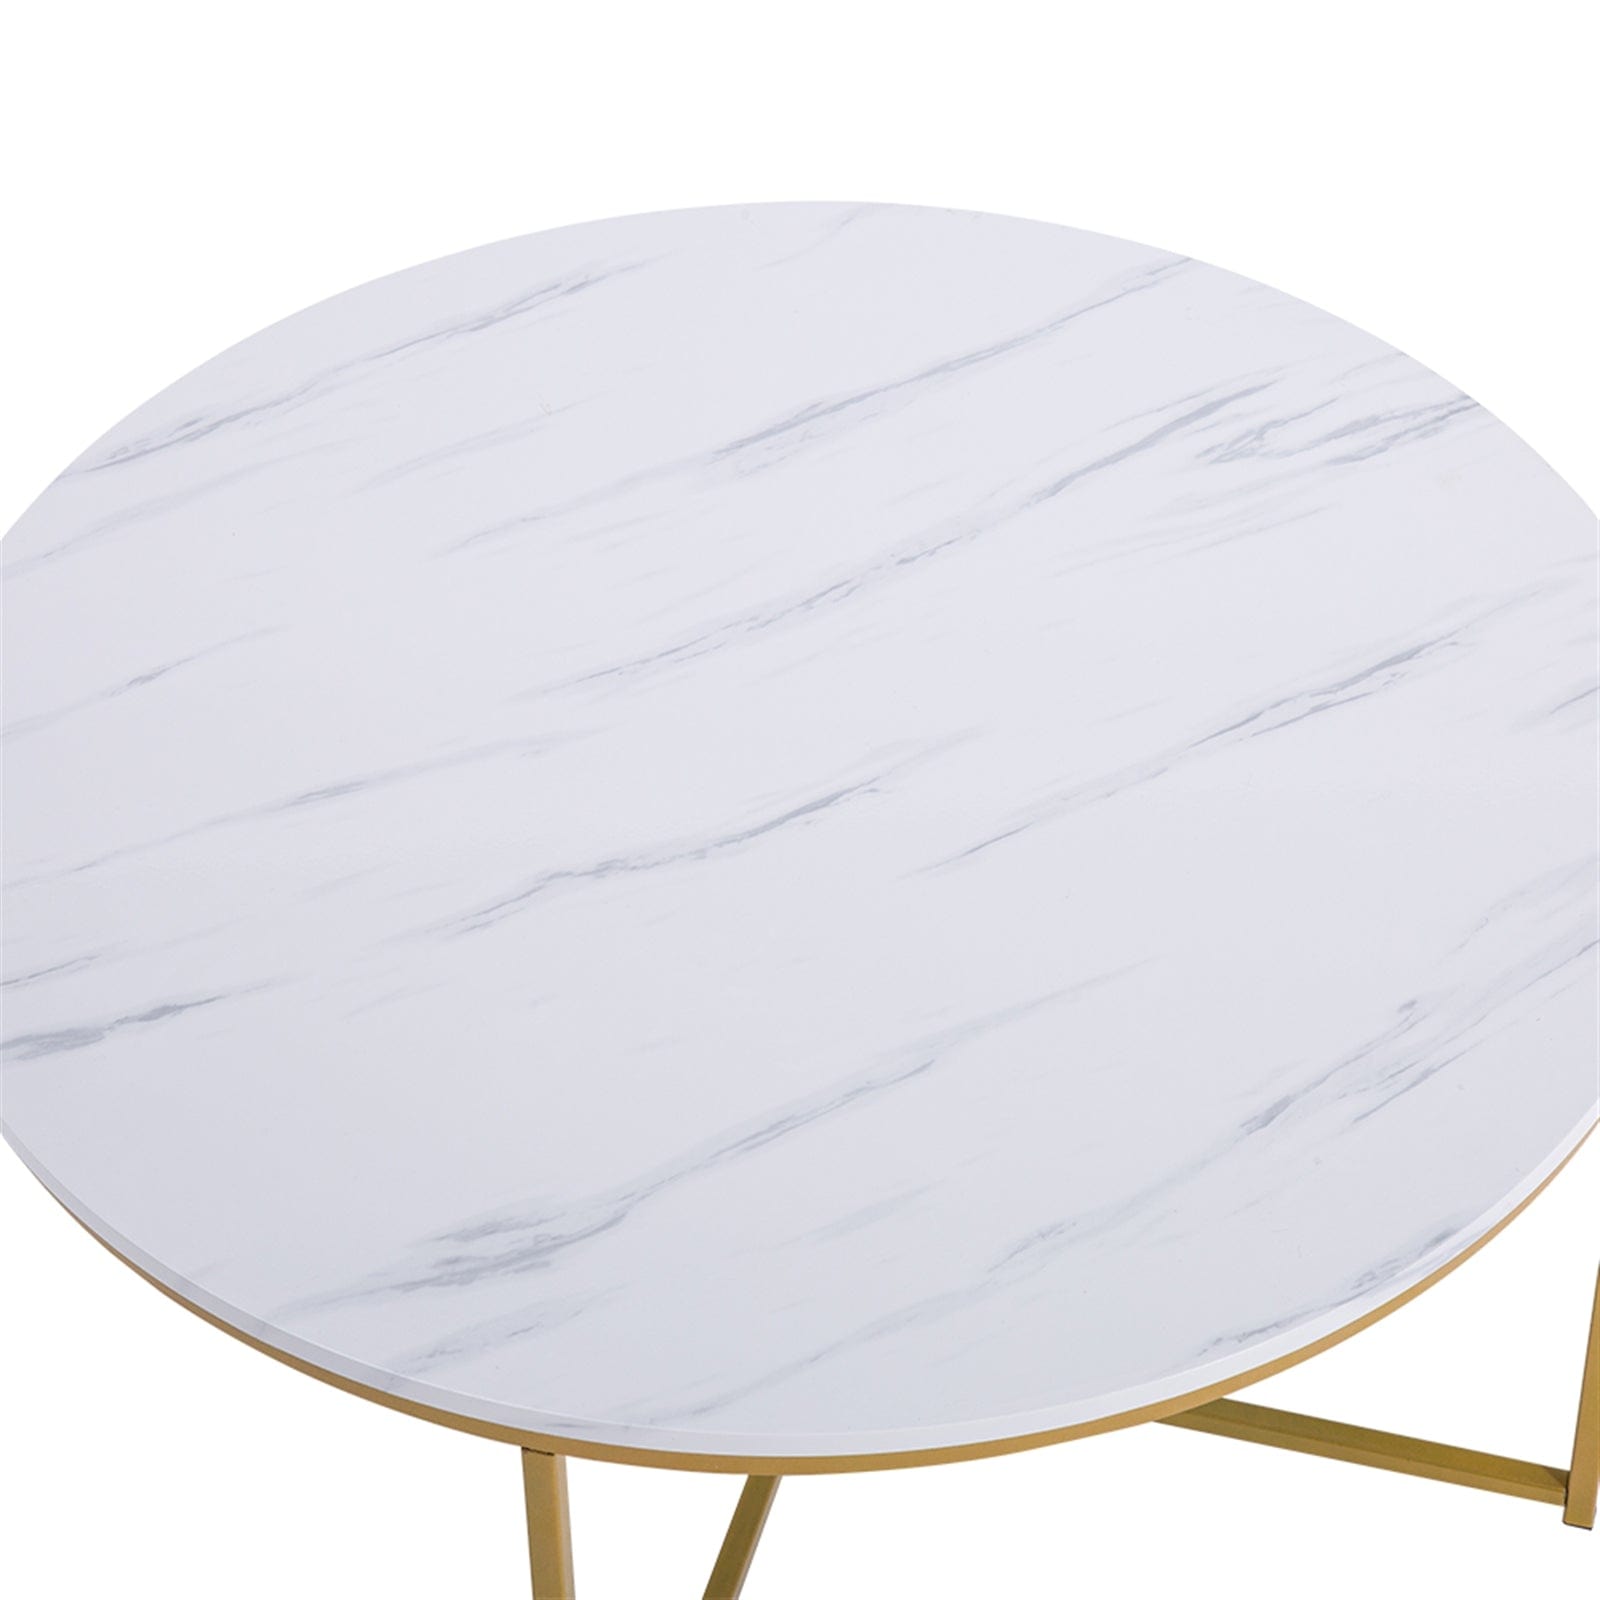 Round Coffee Table - White - HomeRelaxOfficial